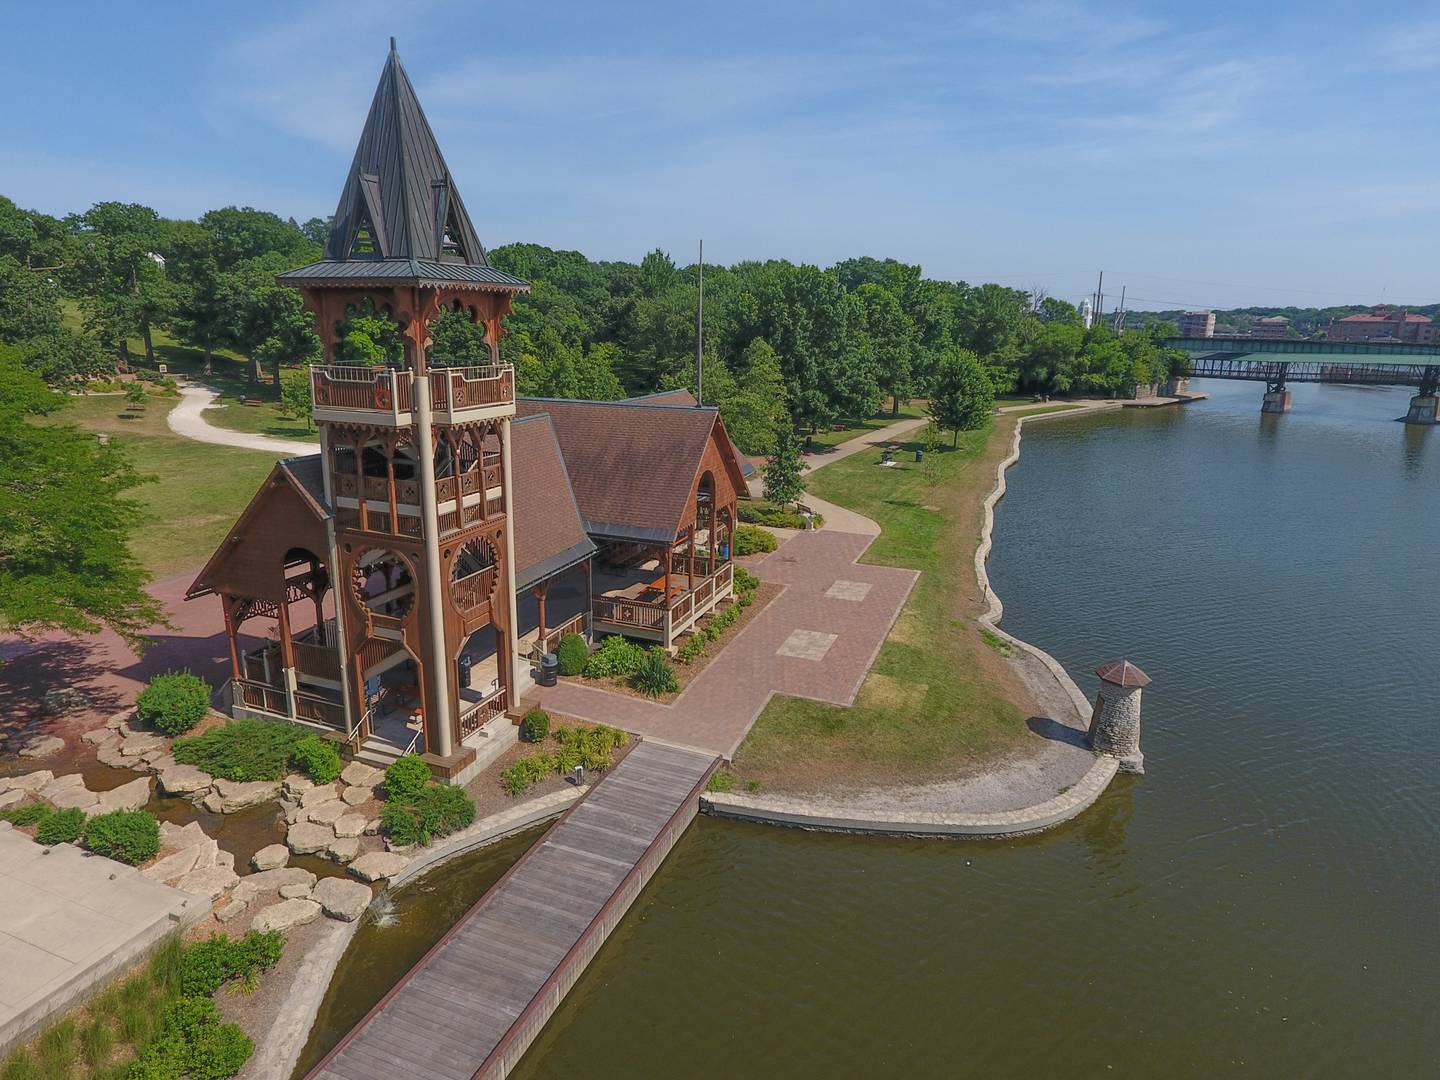 The 47-acre Pottawatomie Park along the east bank of the Fox River in the heart of downtown St. Charles is a one-stop super fun destination.